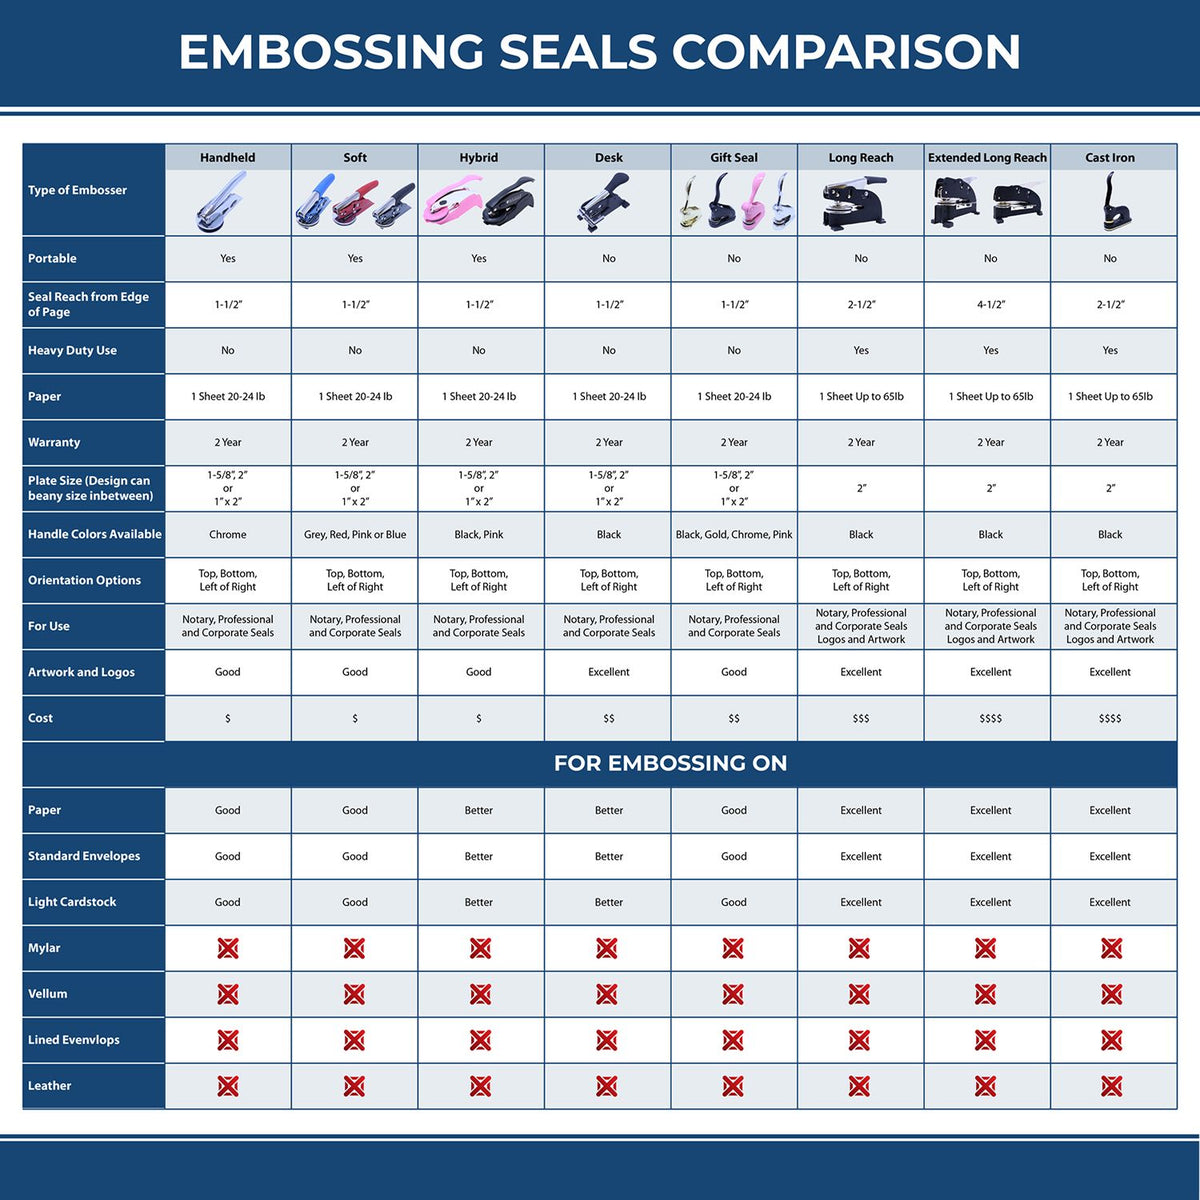 A comparison chart for the different types of mount models available for the State of Montana Soft Land Surveyor Embossing Seal.